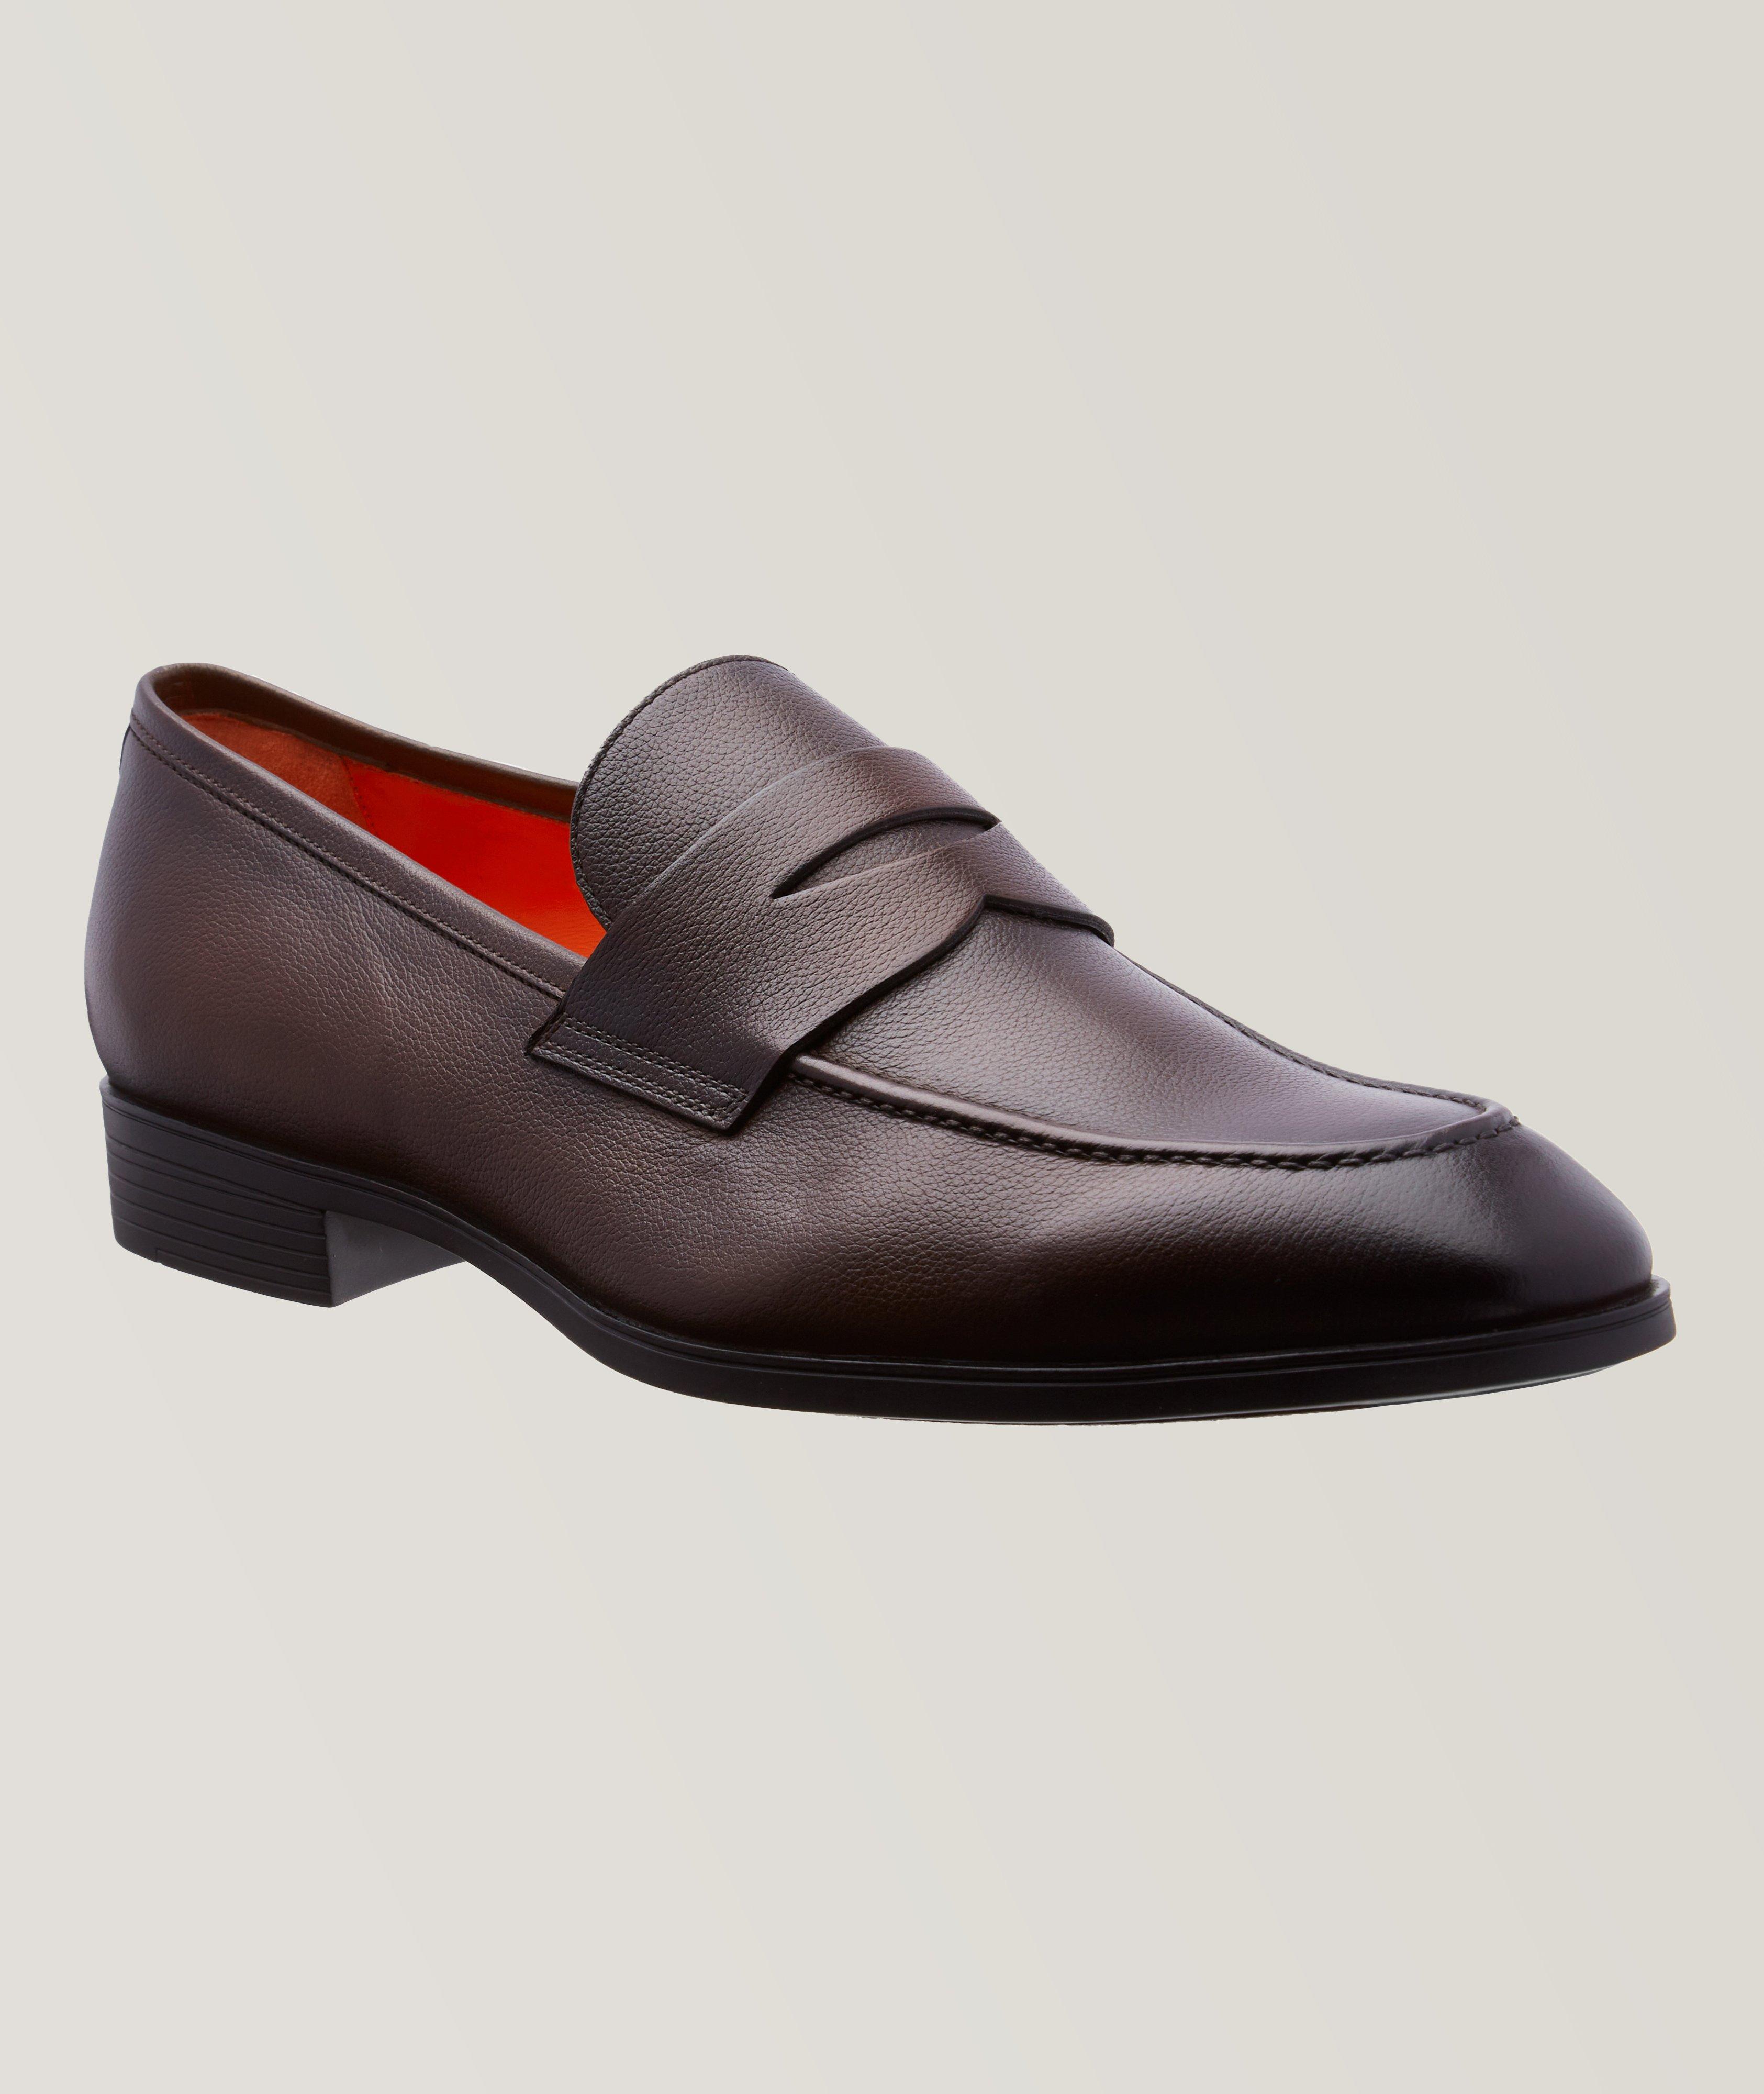 Grained Leather Simon Penny Loafer image 0